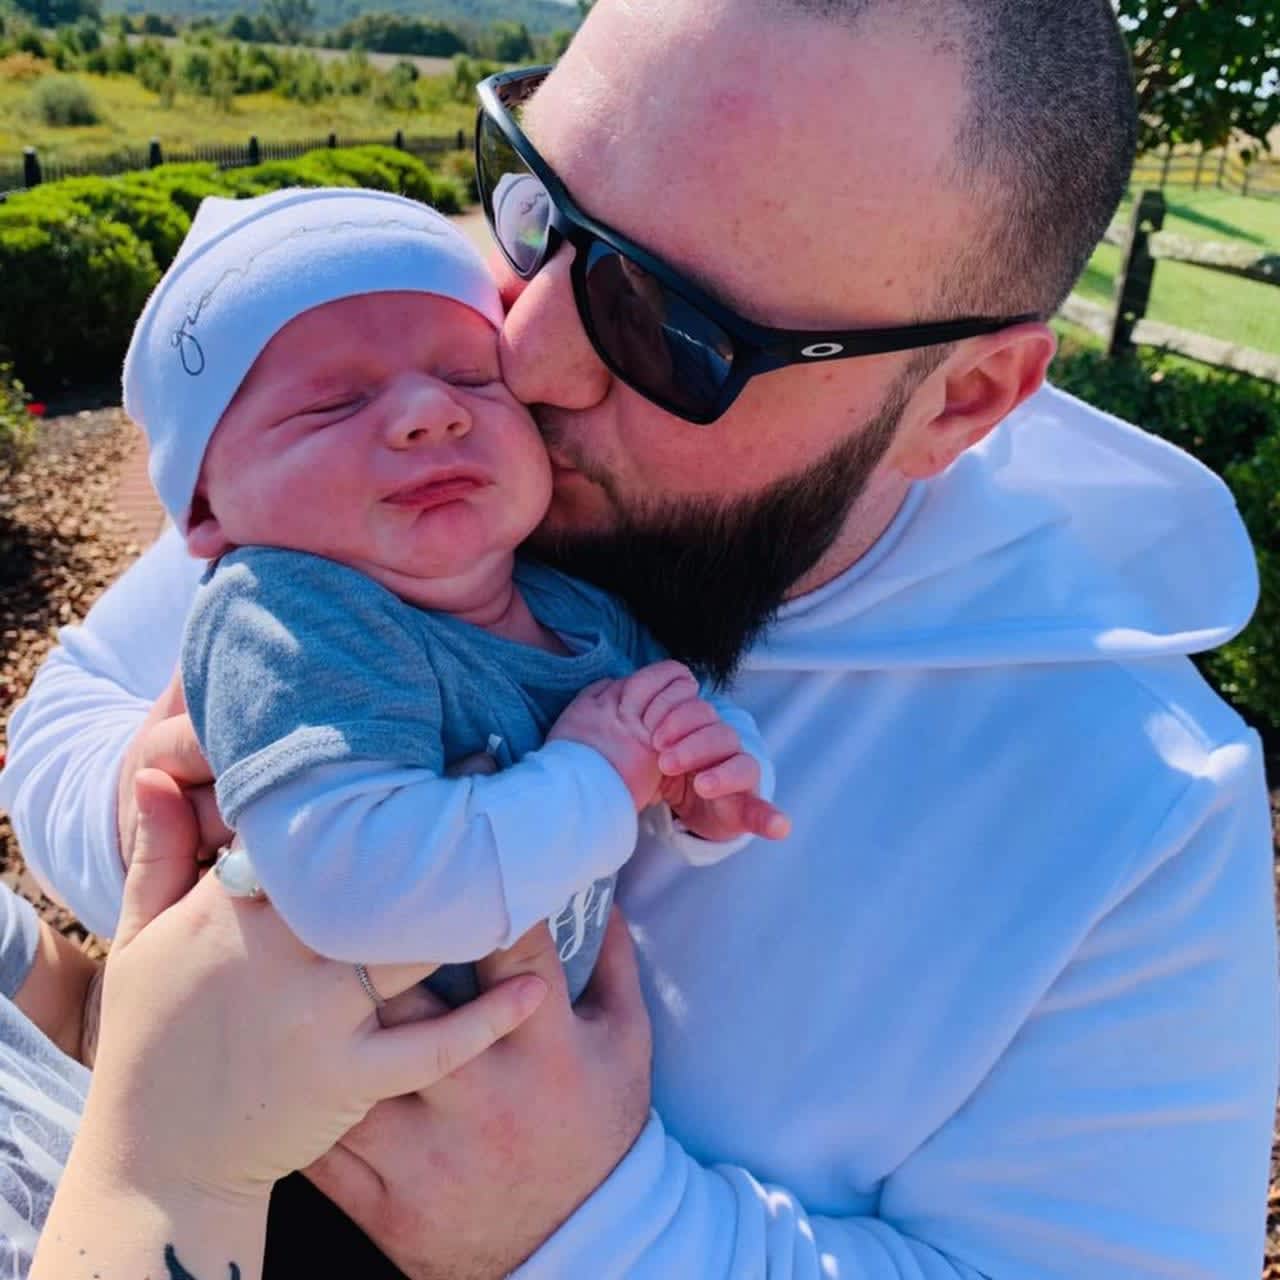 Support is surging for the infant son and girlfriend of Easton football coach Joshua Michael Albani, who died suddenly on June 2 at the age of 32.